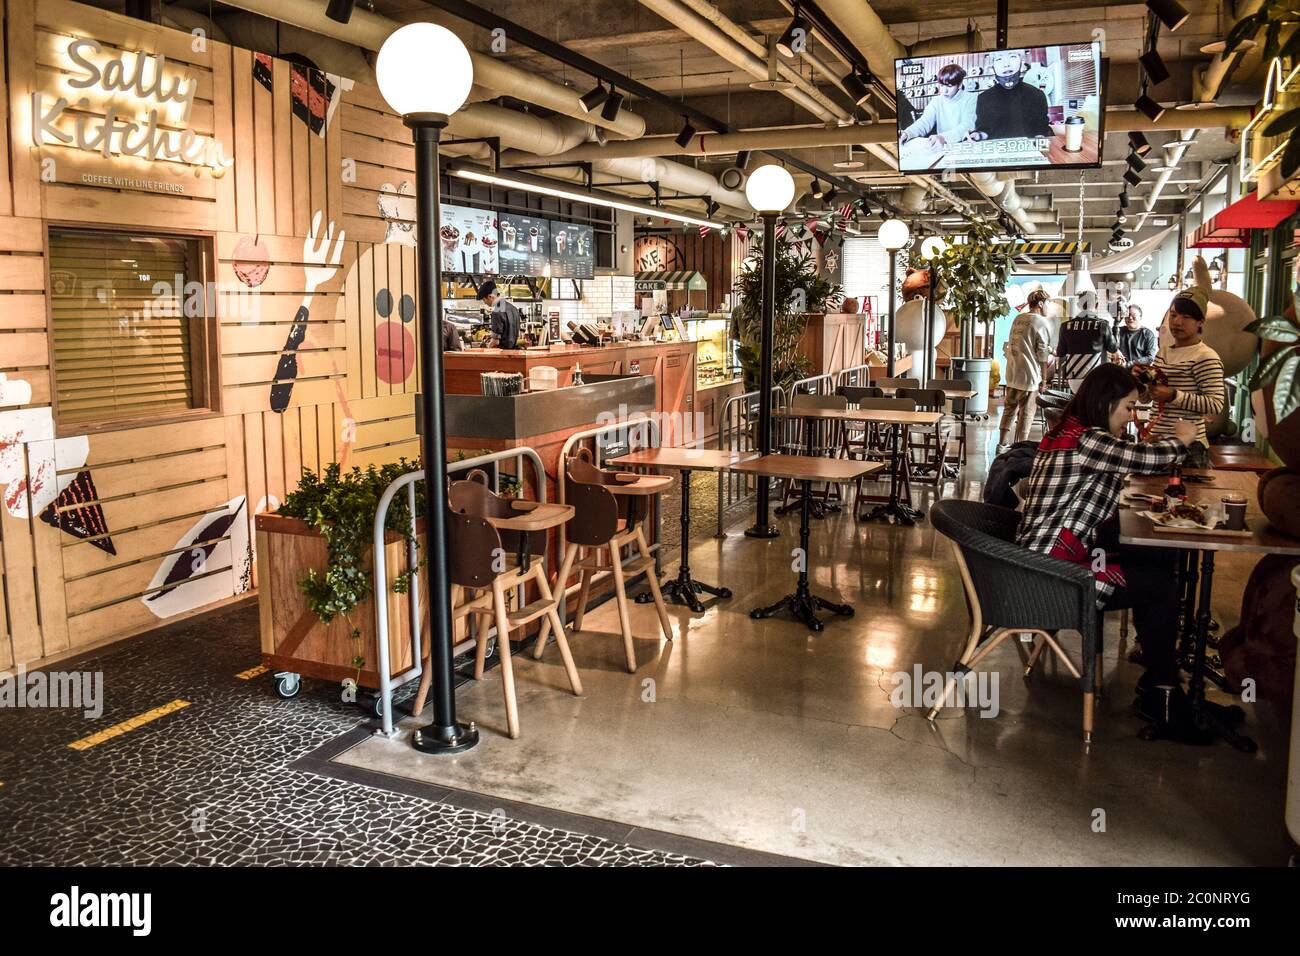 The Interior of the Line Friends Café and Store in Insadong Seoul South Korea Stock Photo